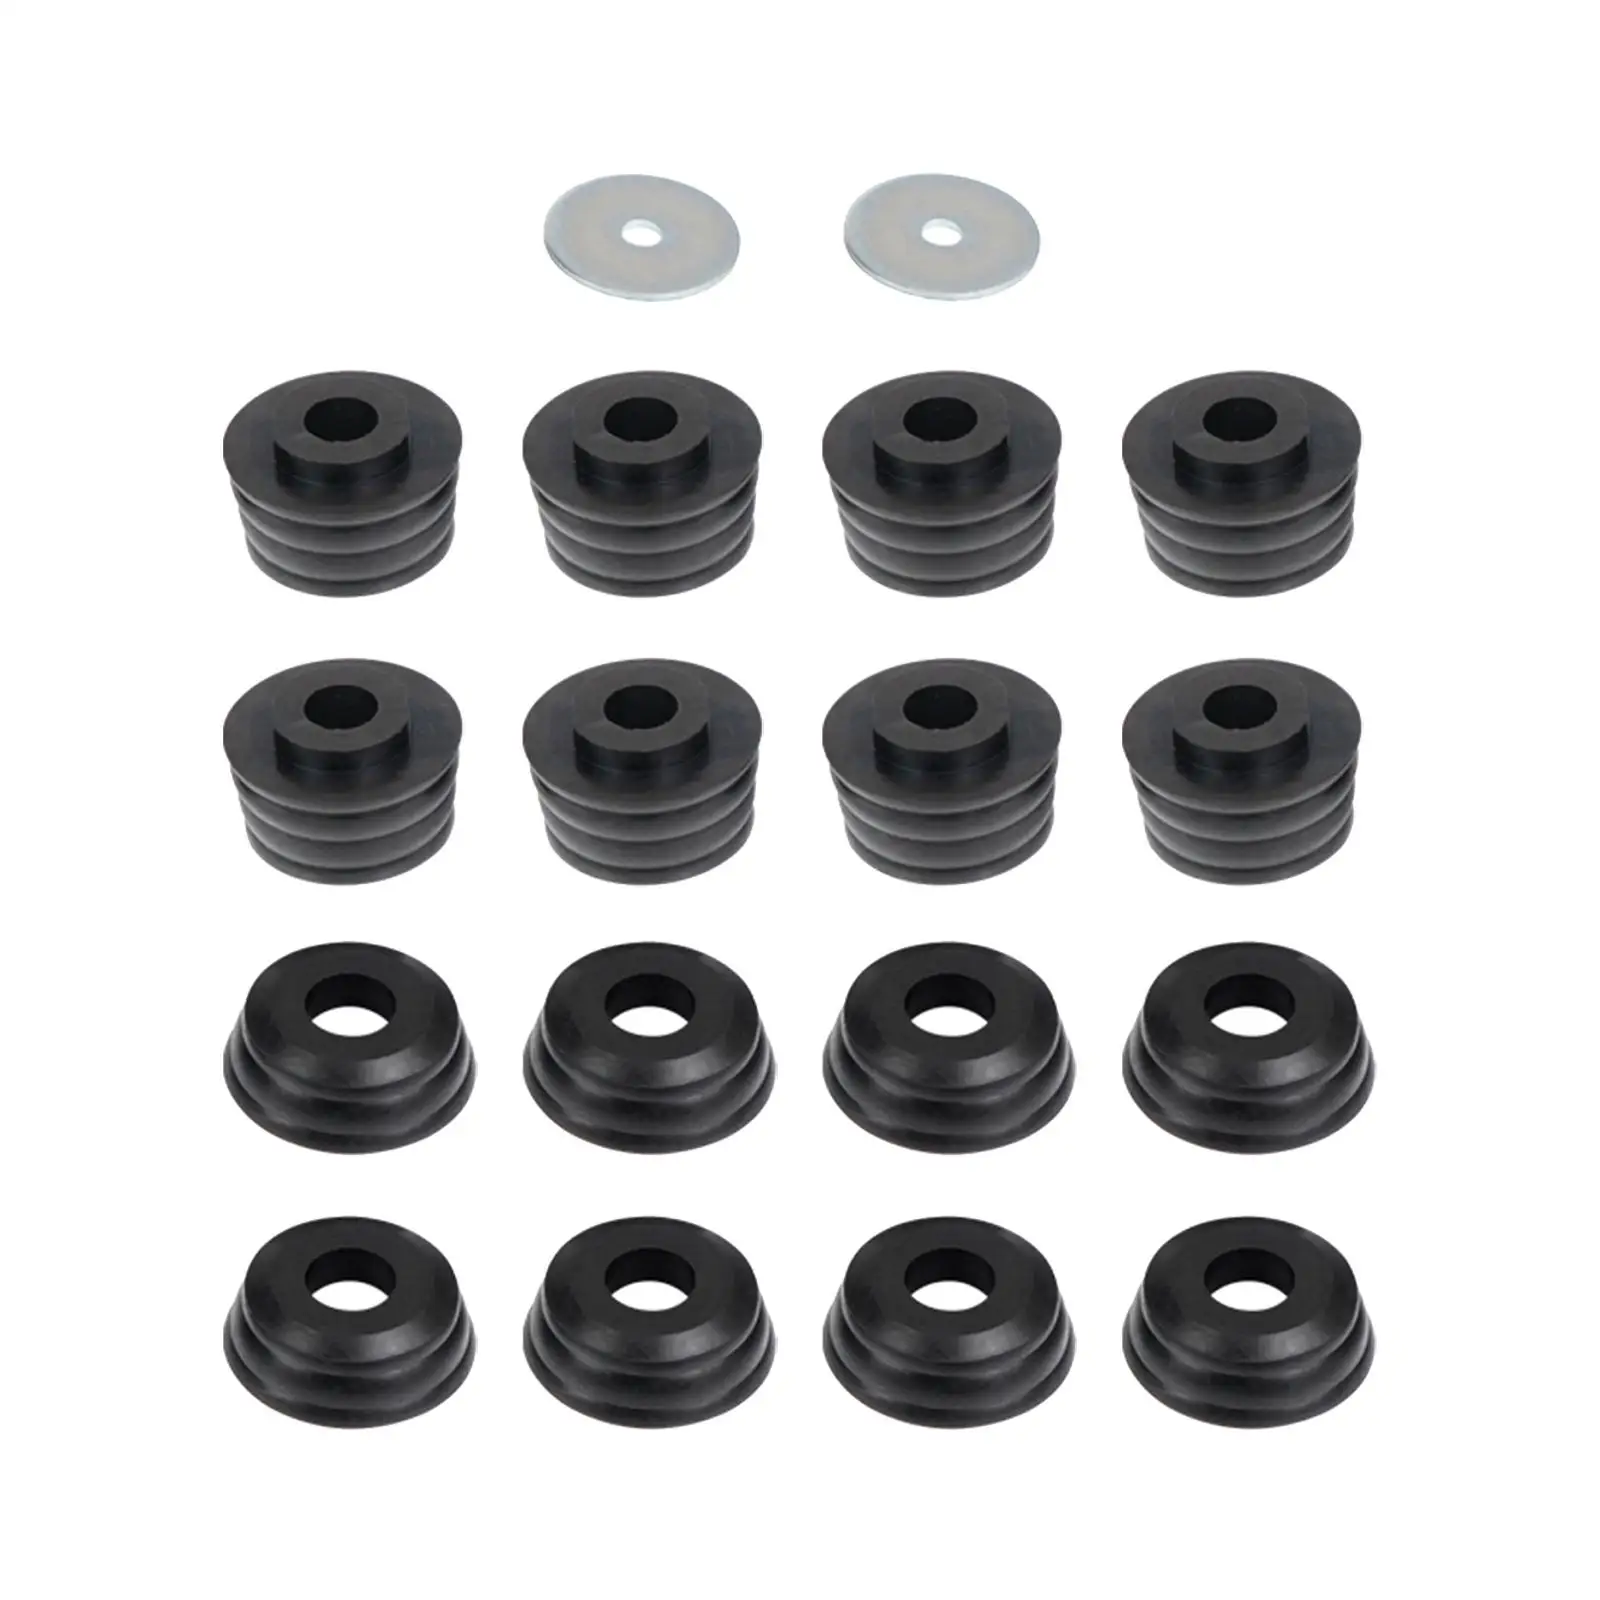 

Body Cab Bushing Kit Spare Parts Replacement Durable Body Mount Bushing Kit for Chevy Silverado 1500 2500 2WD 4WD 1999-2014